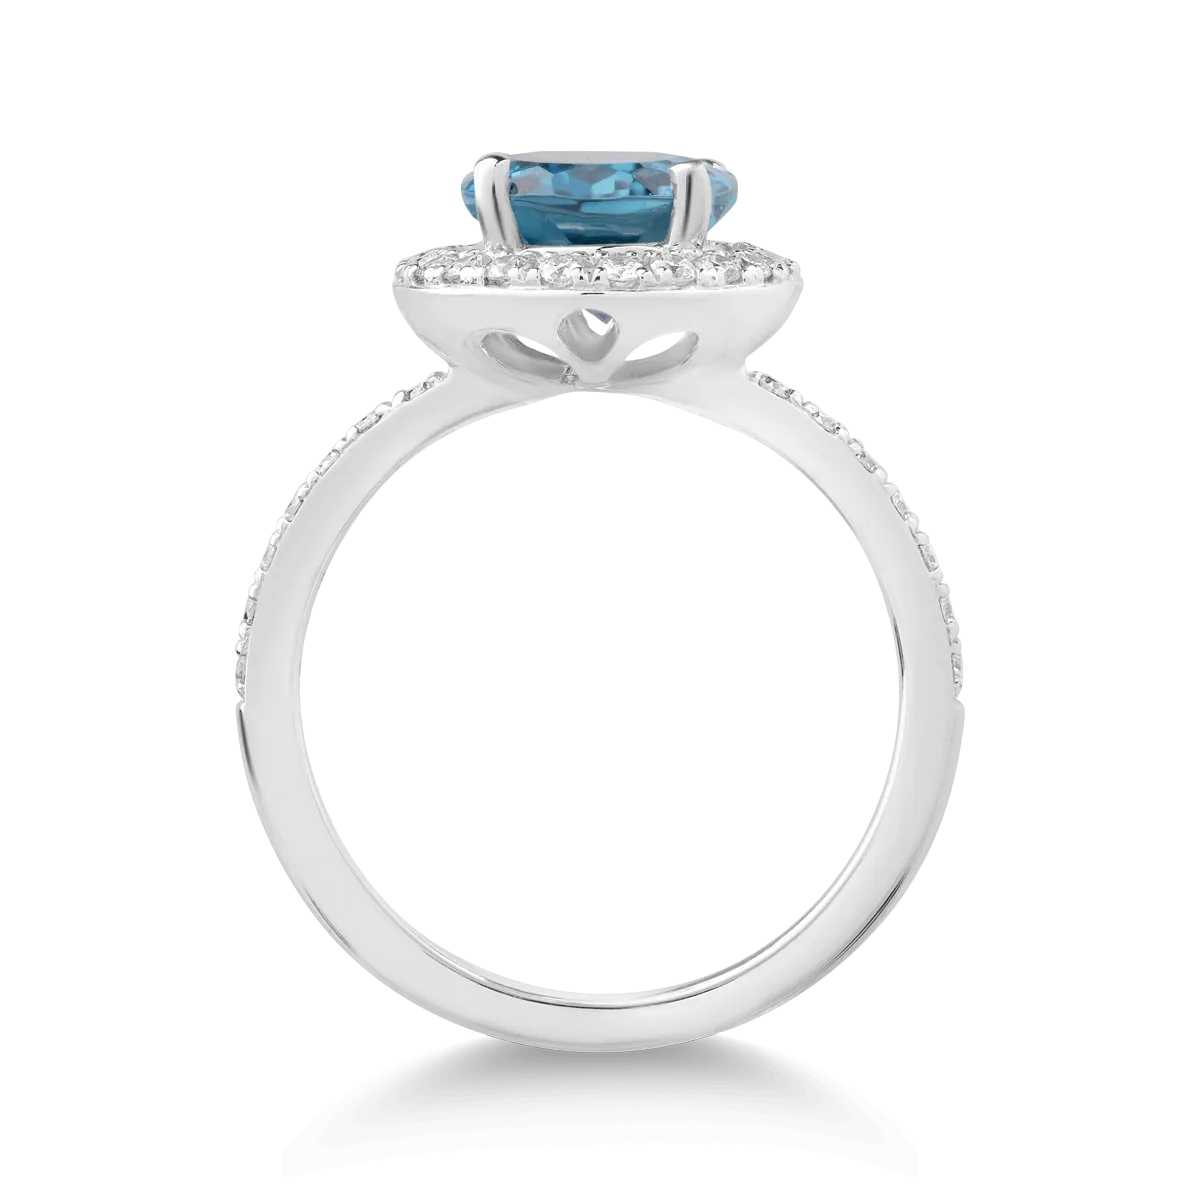 18K white gold ring with 2.43ct London blue topaz and 0.25ct diamonds